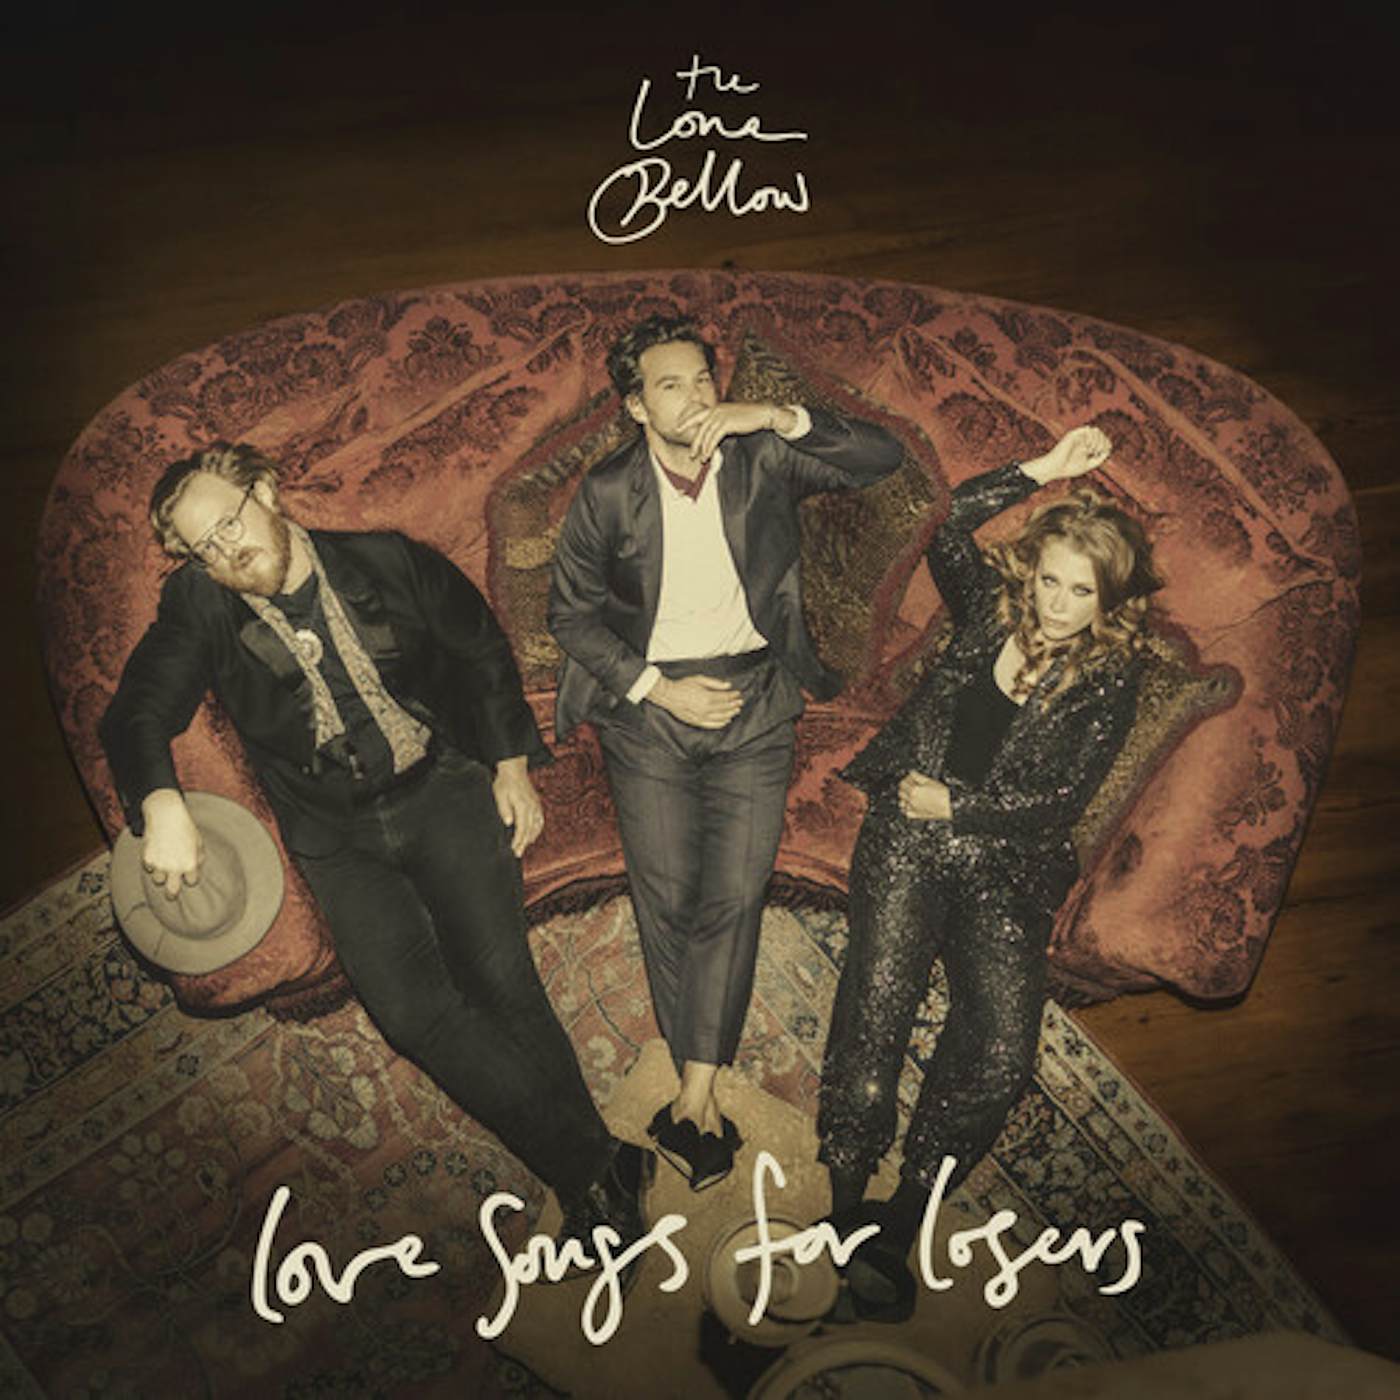 The Lone Bellow LOVE SONGS FOR LOSERS CD